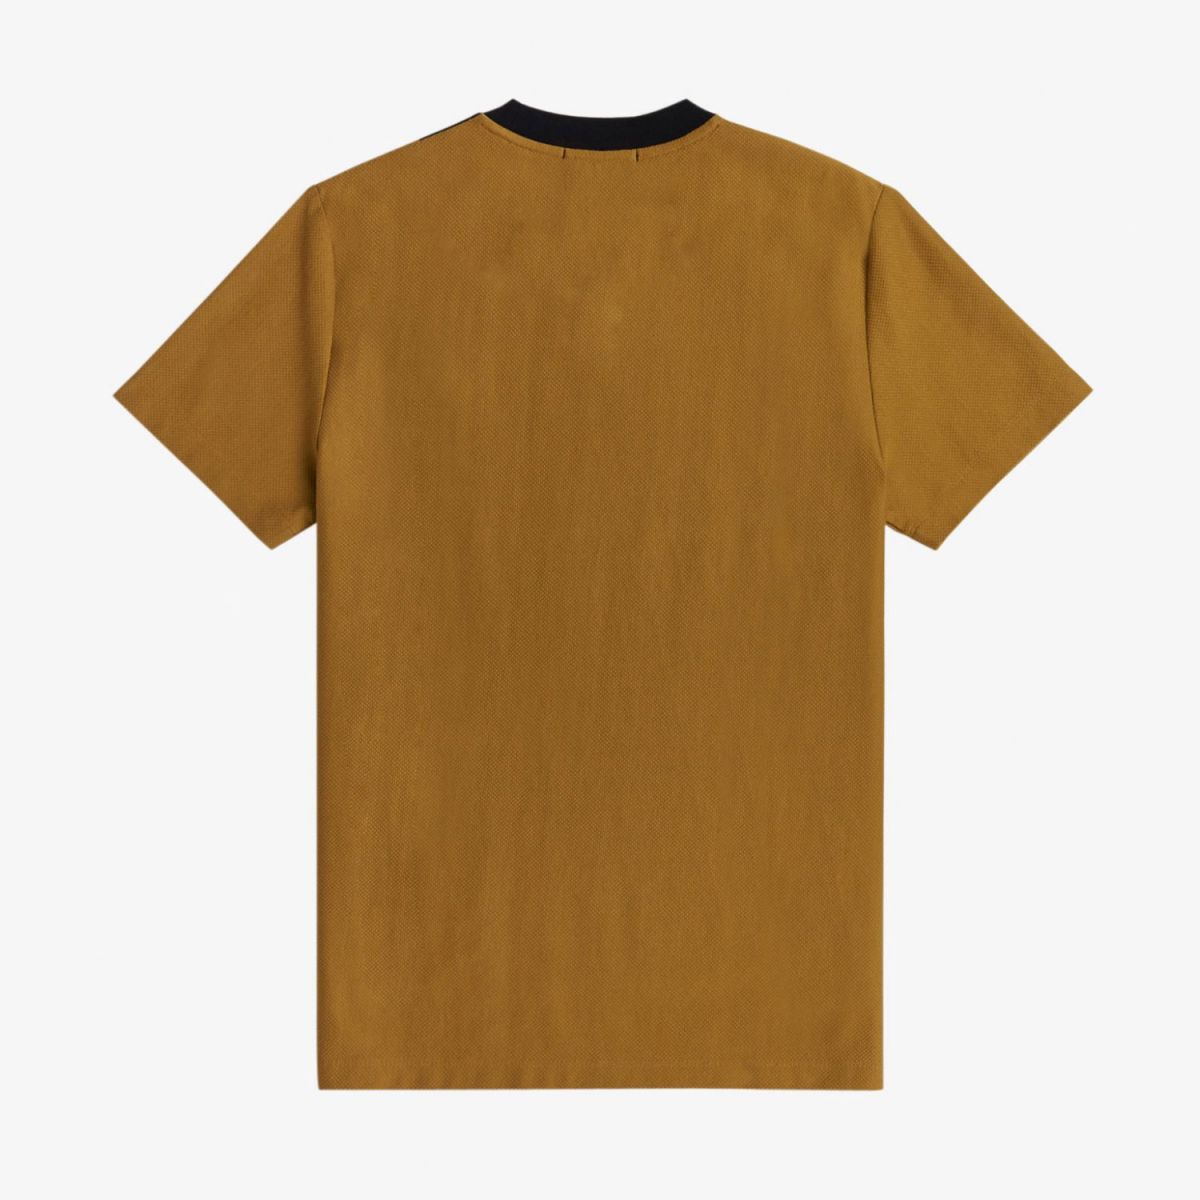 Fred Perry Stripped Pique Tee - Dark Caramel